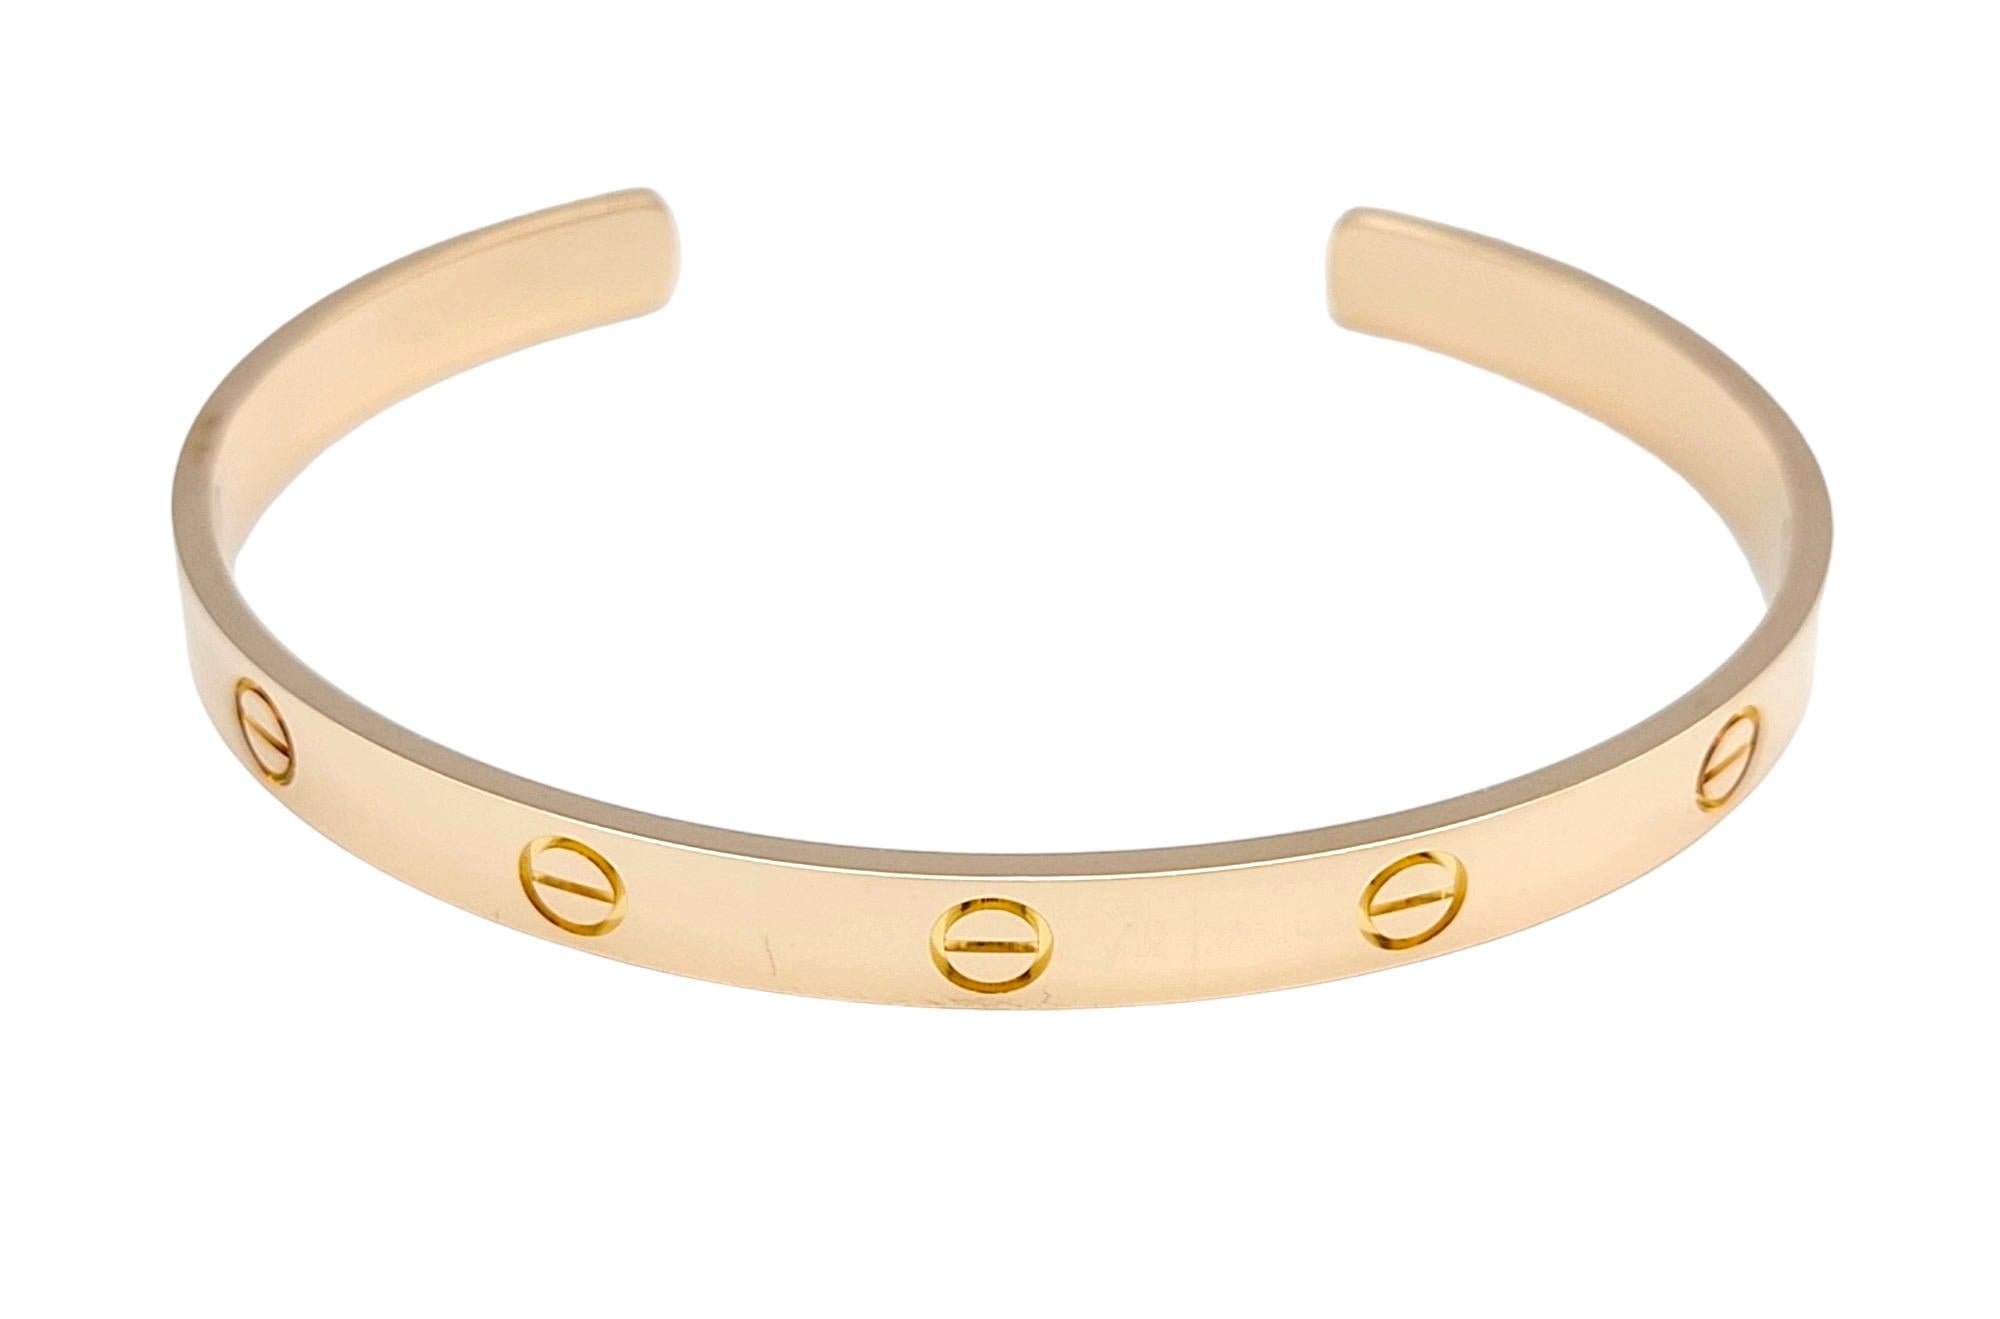 The inner circumference of this bracelet measures 6.75 inches and will comfortably fit a 6.25 - 6.75 inch wrist. 

This stunning Cartier Love cuff bracelet in 18 karat rose gold is a symbol of enduring love and timeless elegance. Crafted by the